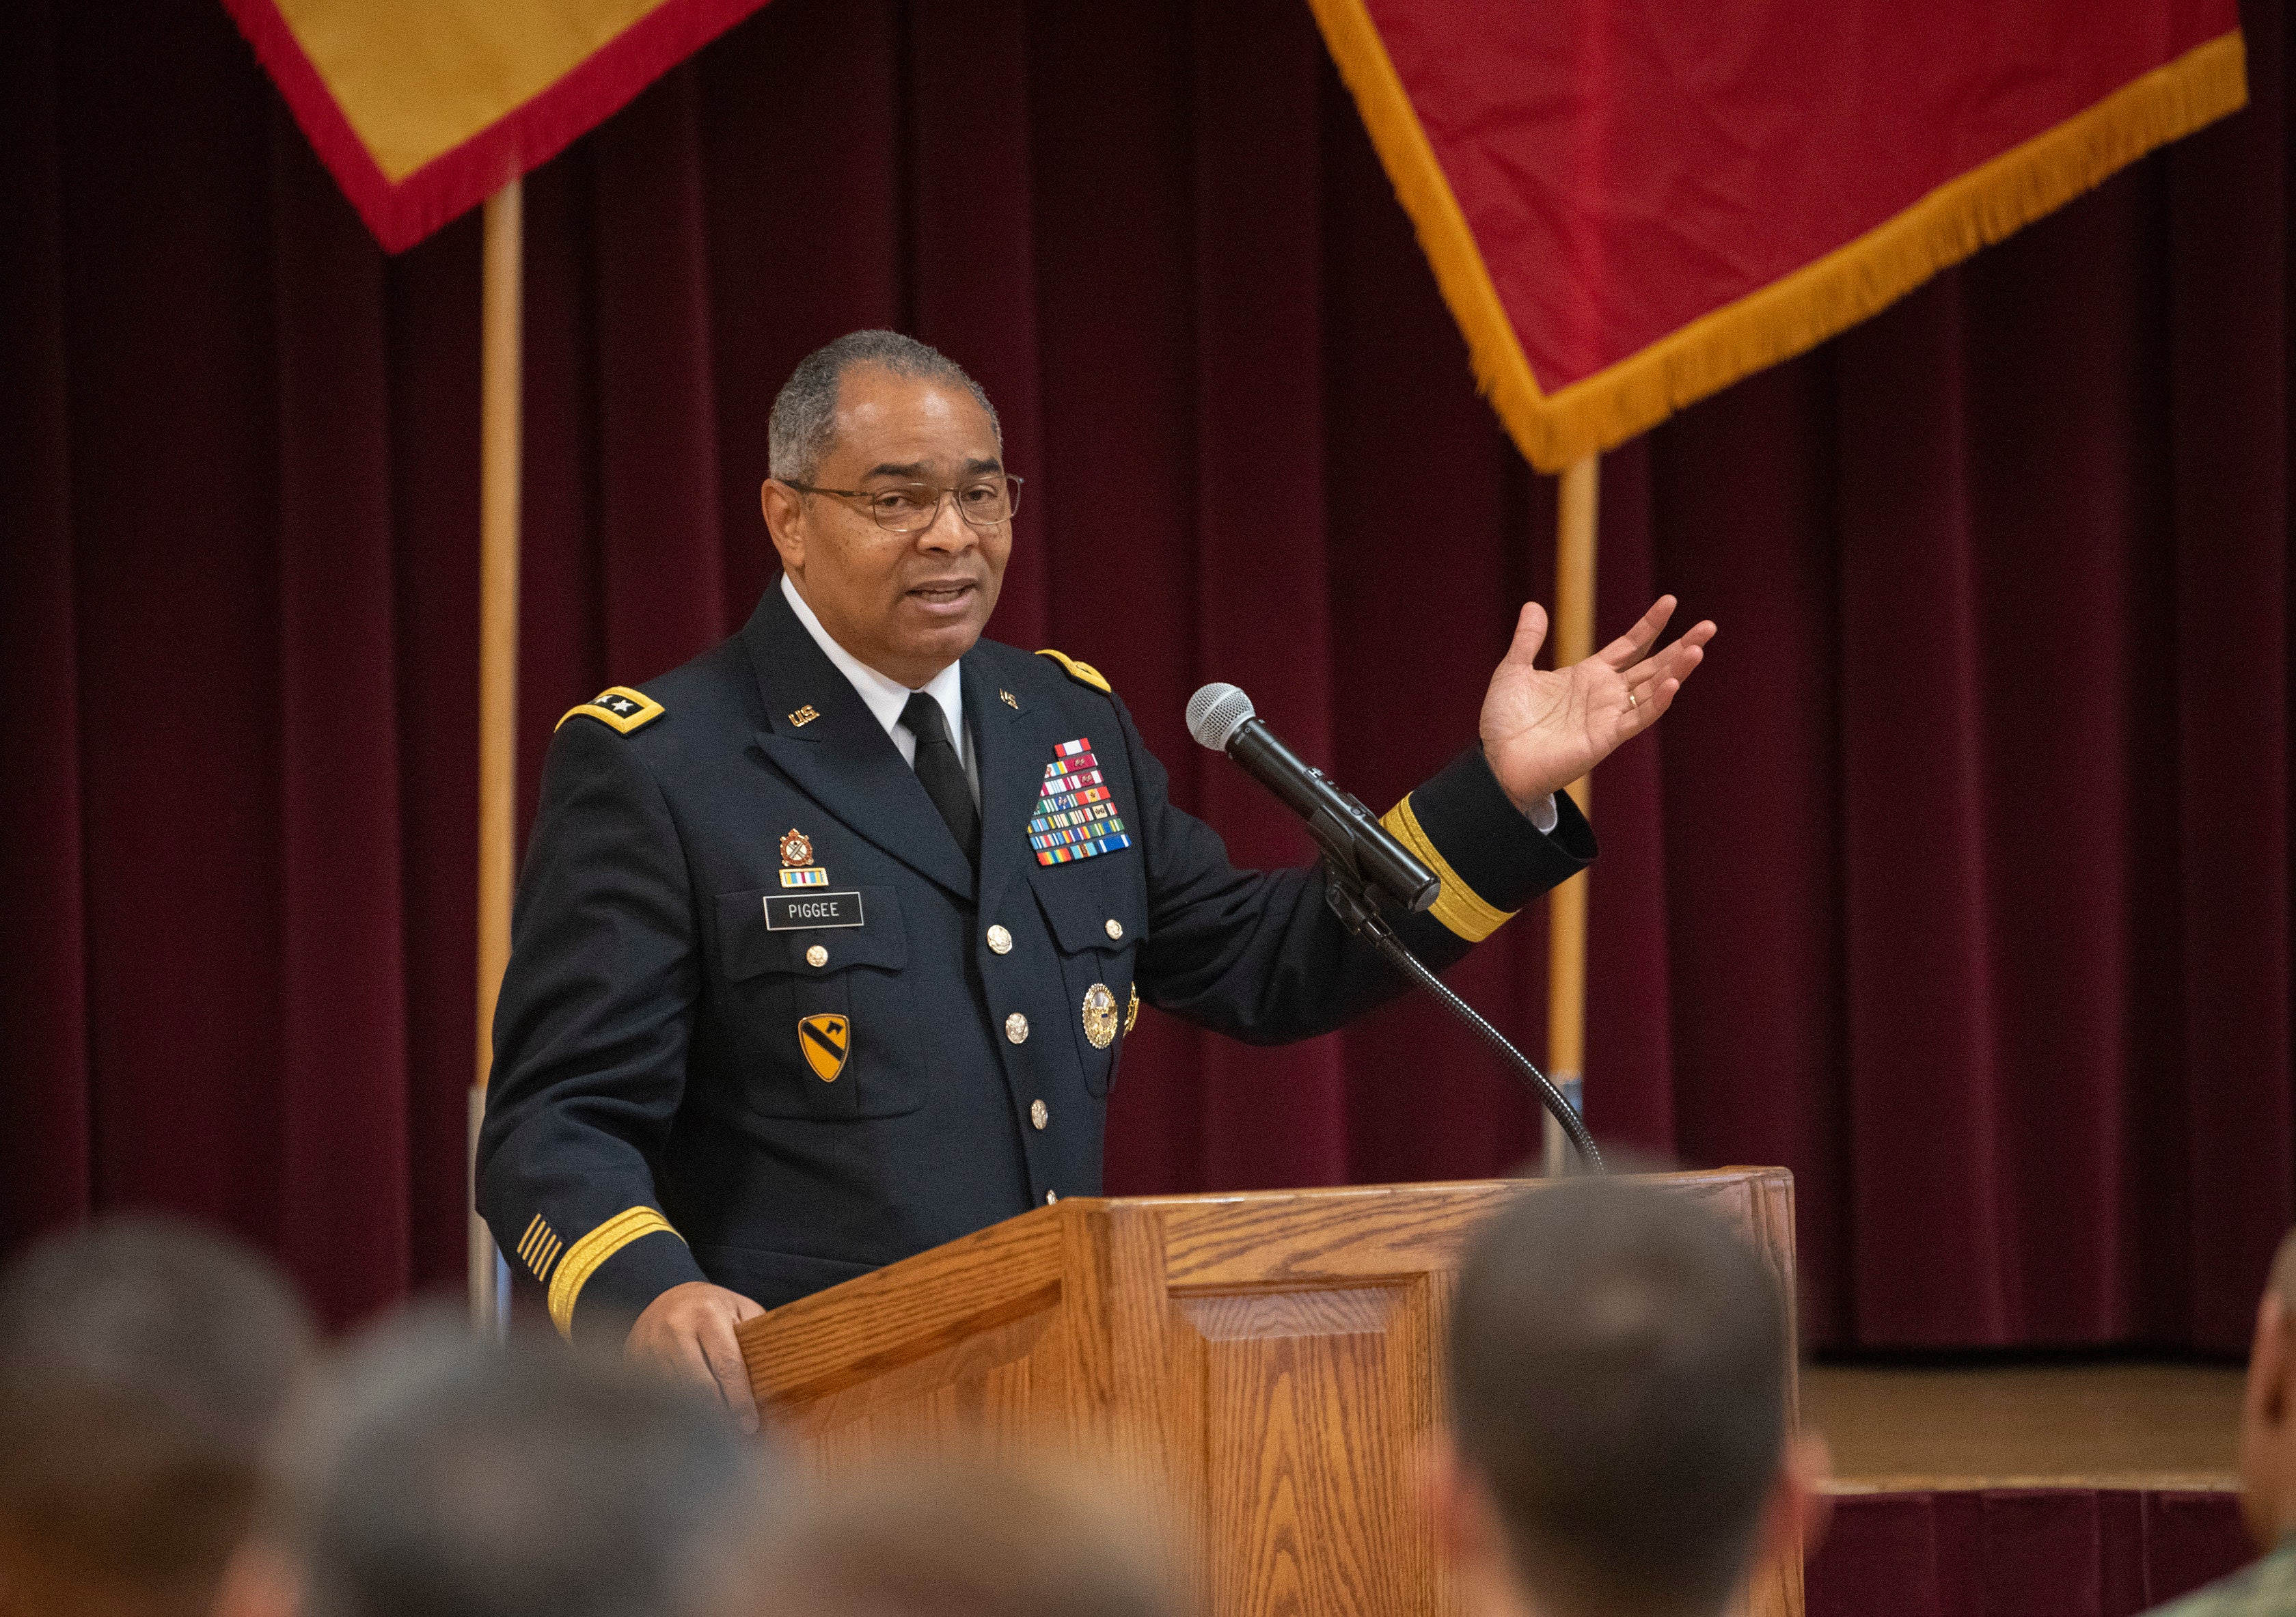 Army general credits Martin Luther King, Jr. for leadership style